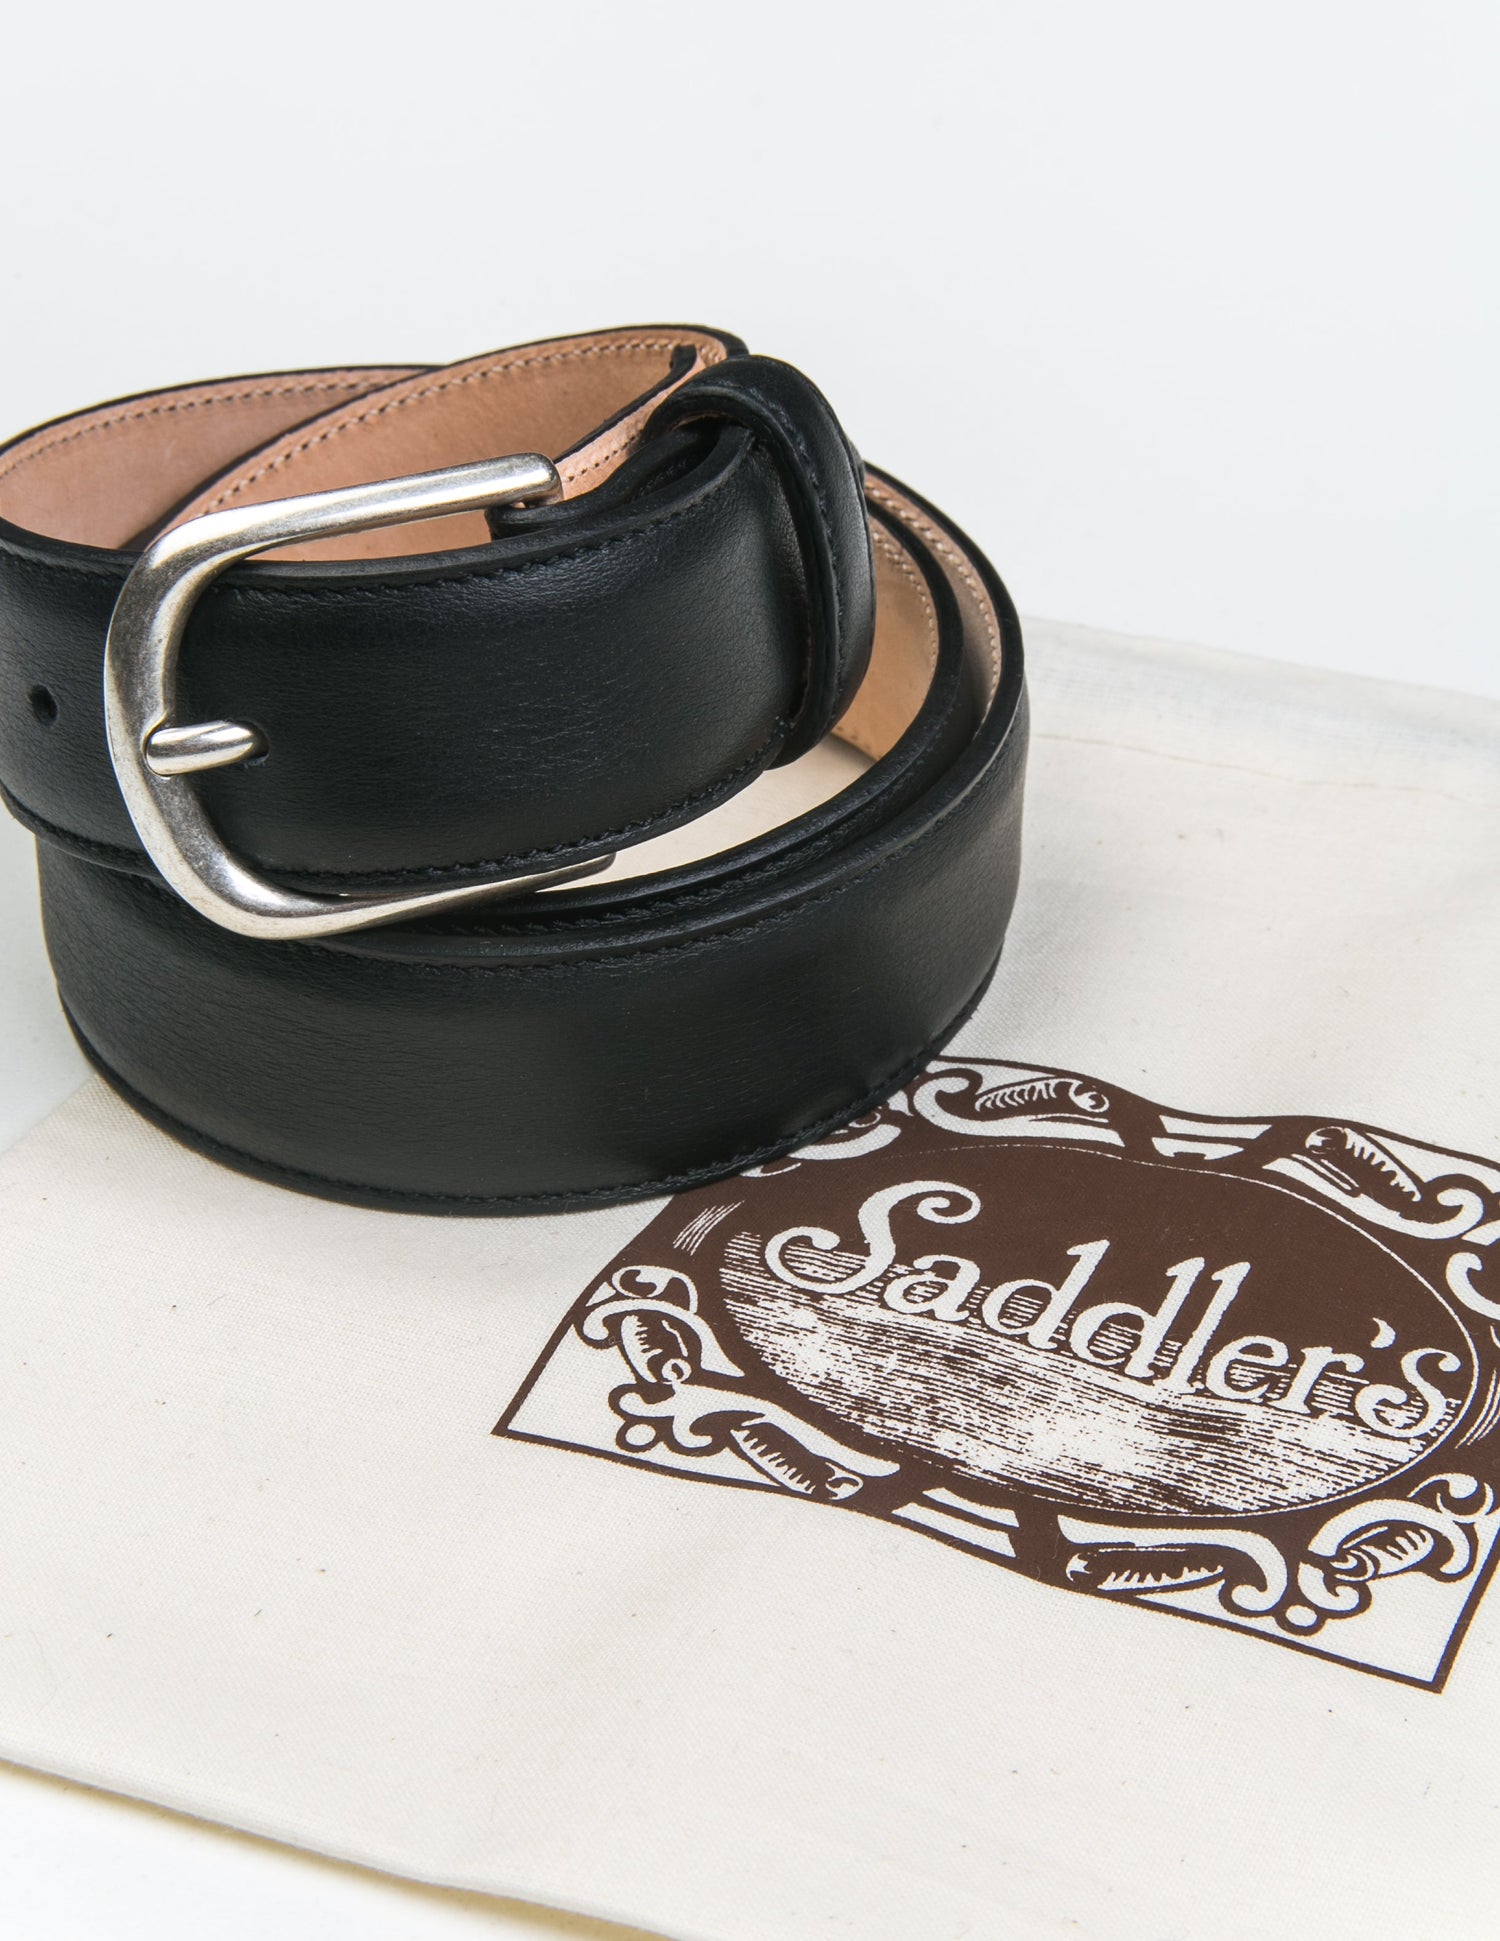 Photo of Brooklyn Tailors x Saddler's 30mm Belt in Smooth Leather - Black coiled next to the fabric bag it is sold with. 